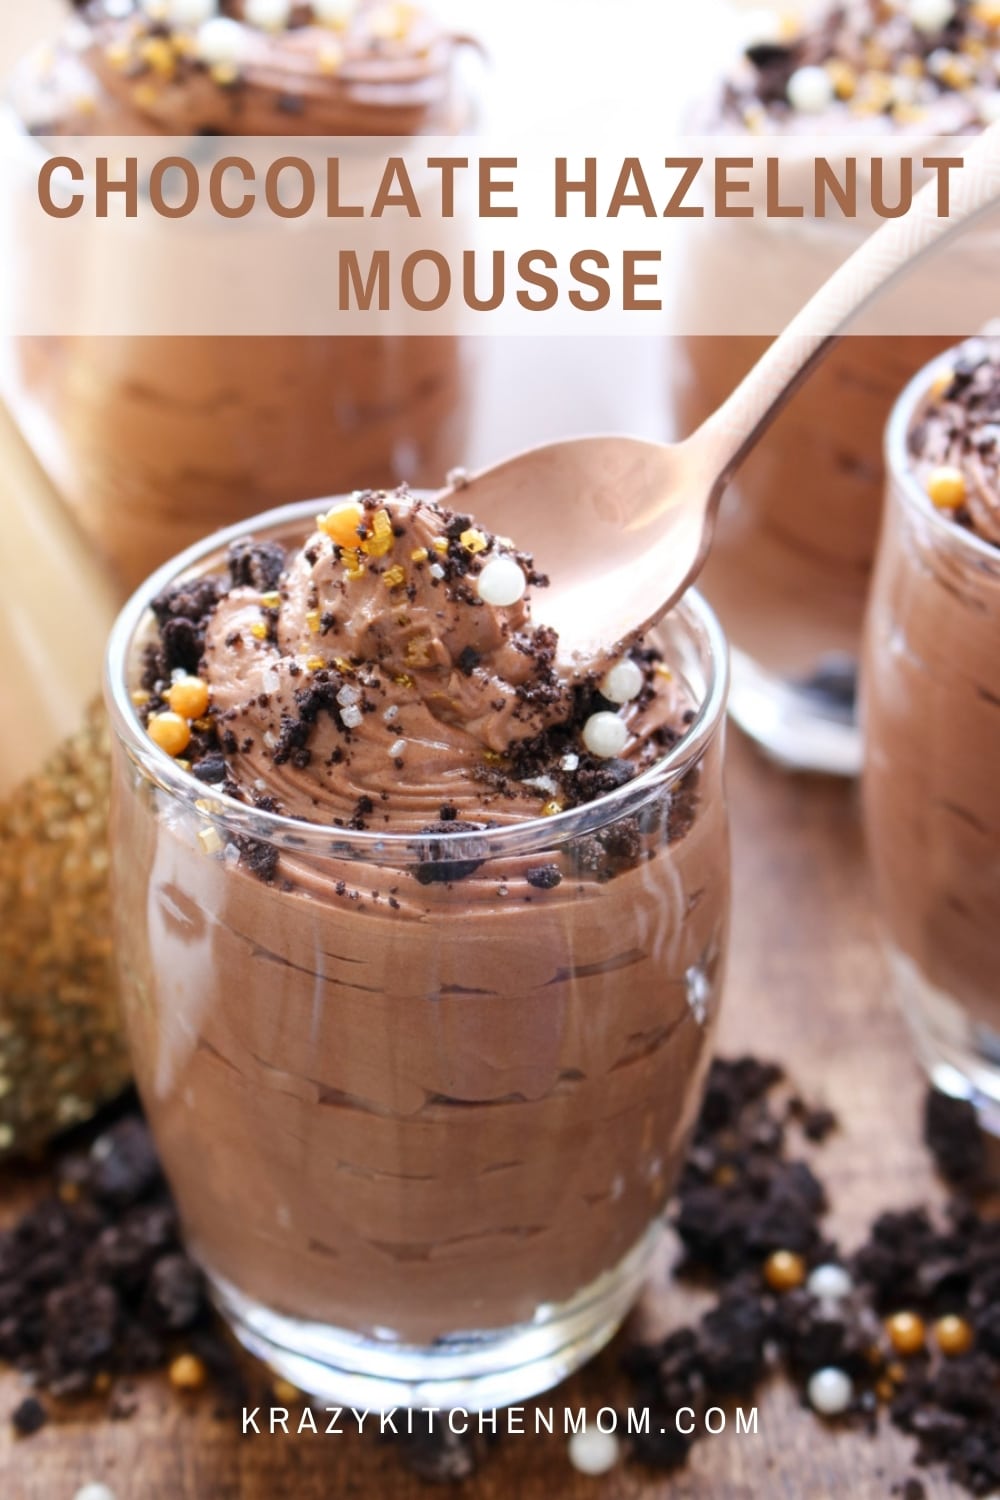 With only four ingredients and ten minutes, you can make the most decadent creamy chocolate mousse that rivals any fancy restaurant dessert.  via @krazykitchenmom